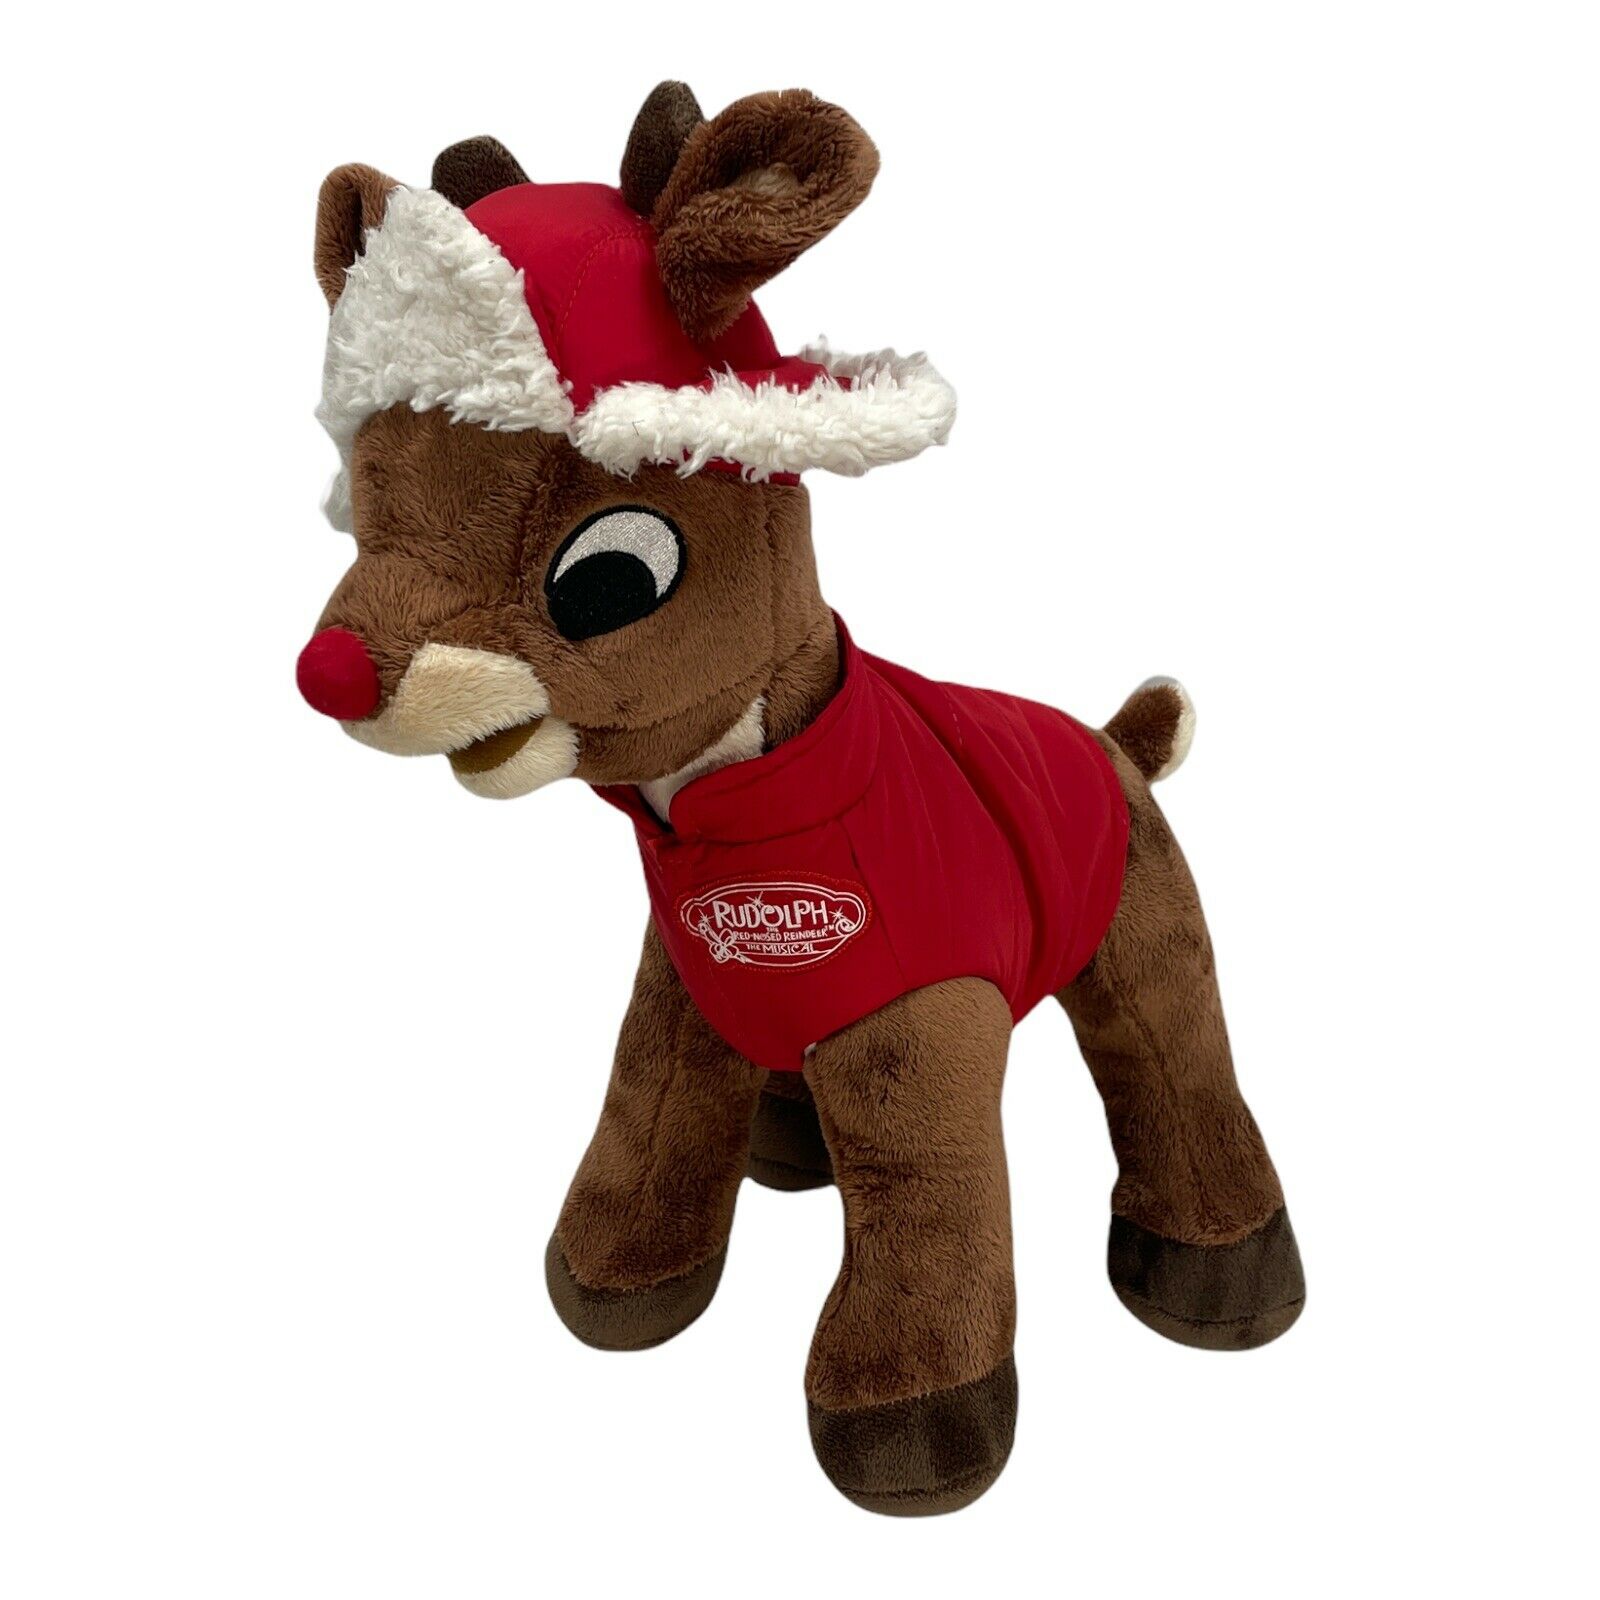 Dandee Large 17" Rudolph Red Nosed Reindeer Plush Toy Doll With Hat And Vest